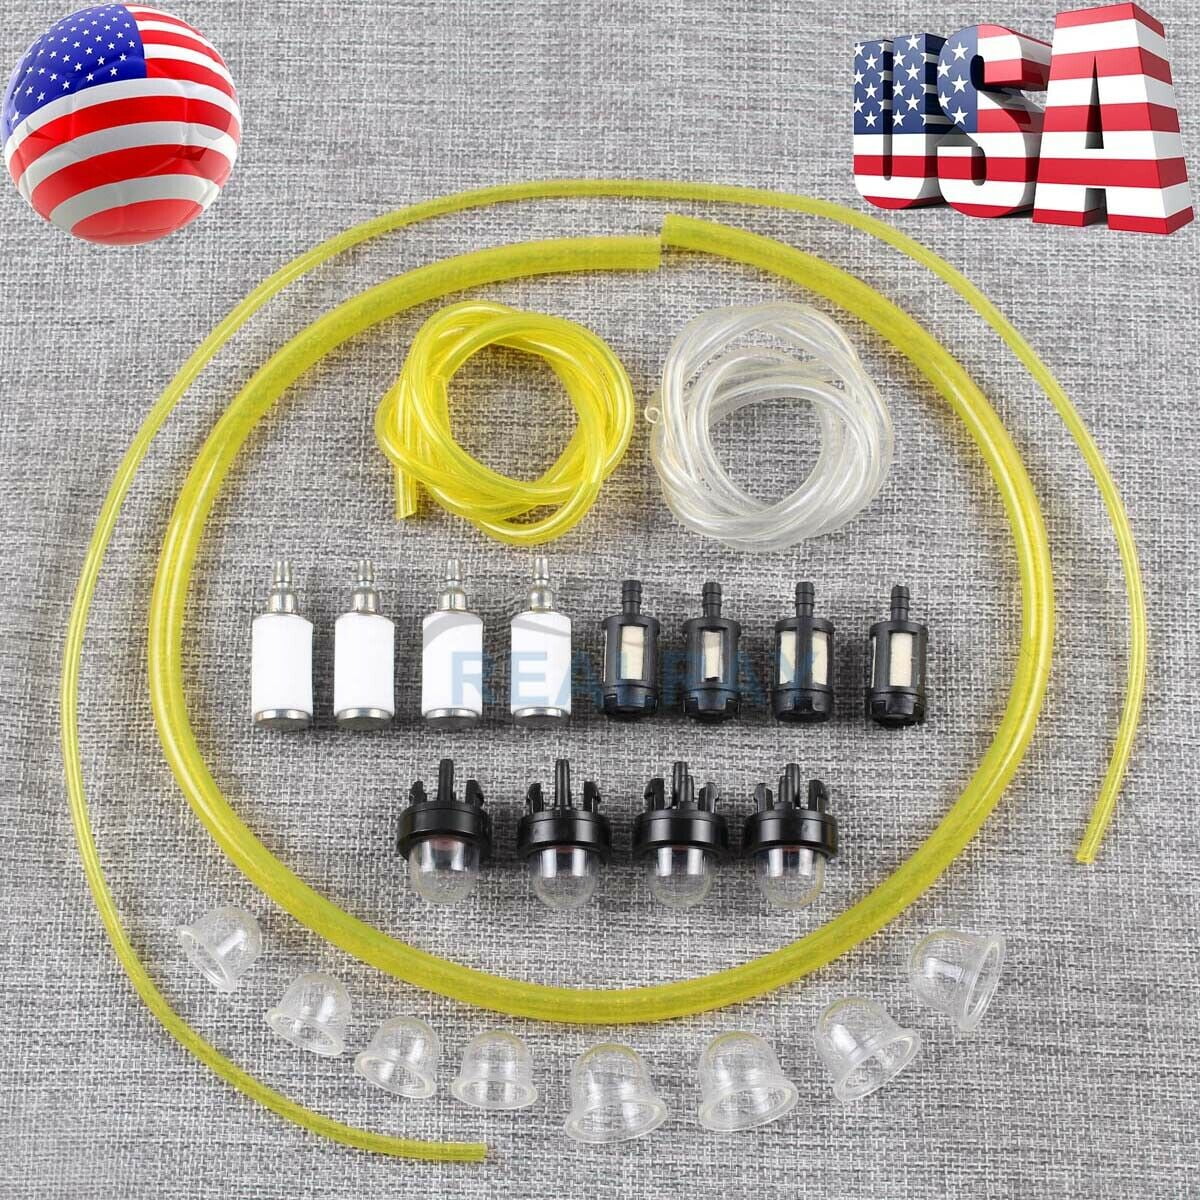 4 SizesTygon Fuel Line& Primer Bulb Fuel Filter Kit for Poulan Chainsaw